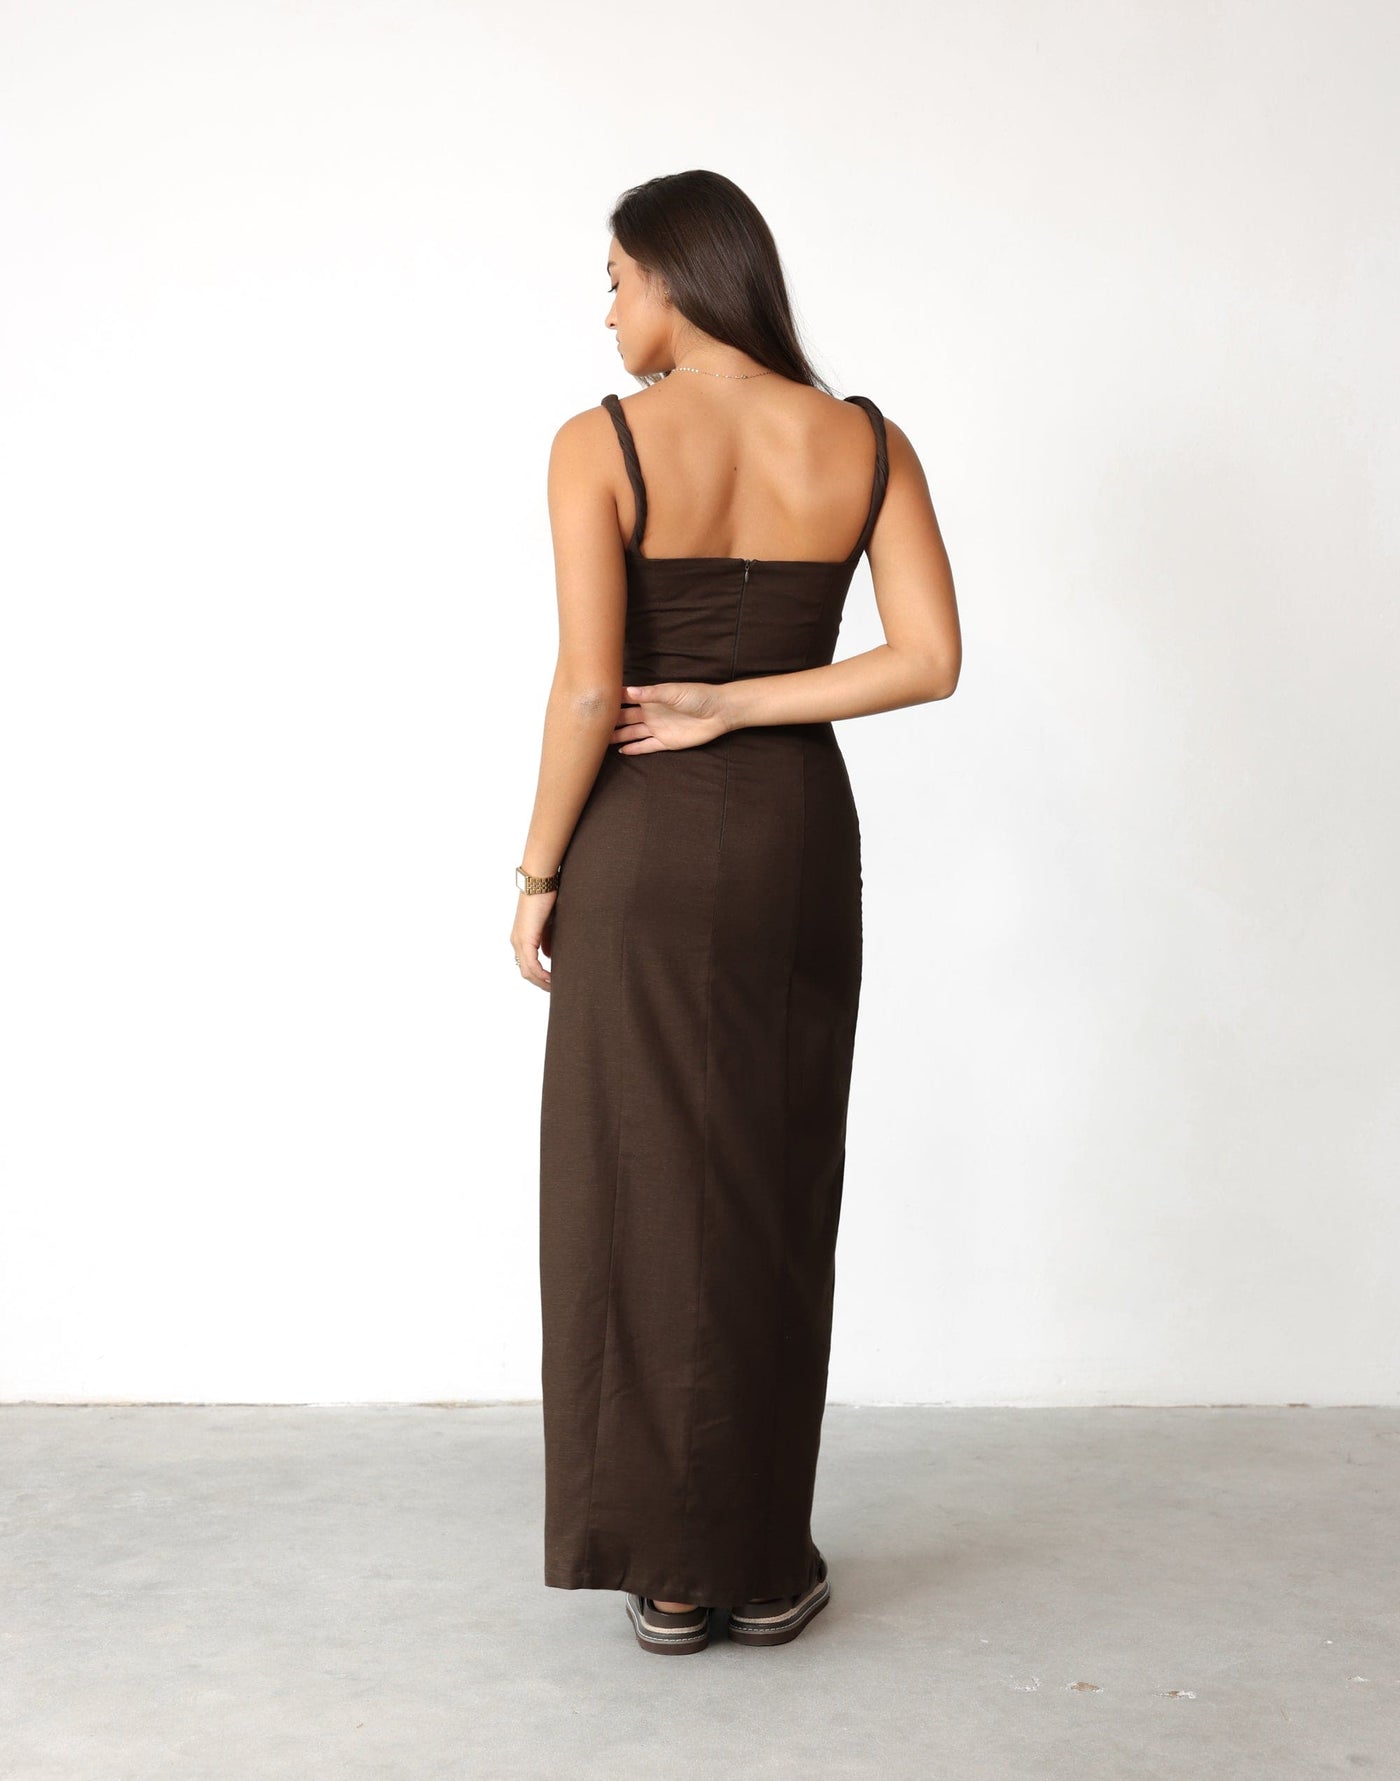 Bacalar Maxi Dress (Chocolate) | Charcoal Clothing Exclusive - Twisted Strap Straight Neck Leg Split Maxi - Women's Dress - Charcoal Clothing